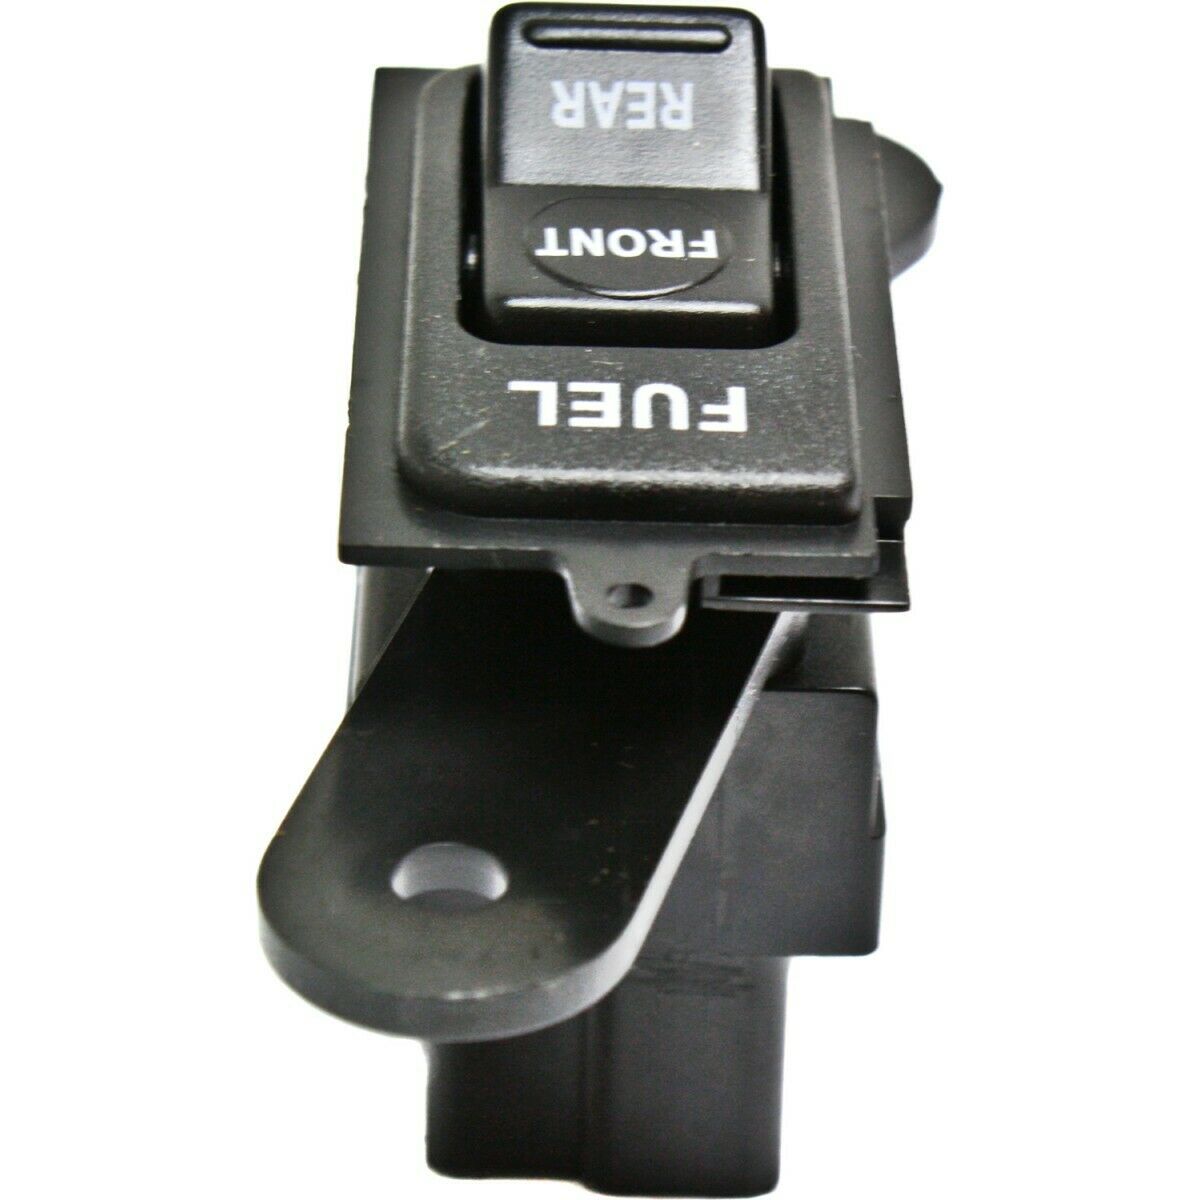 Fuel Tank Selector Switch - Gas